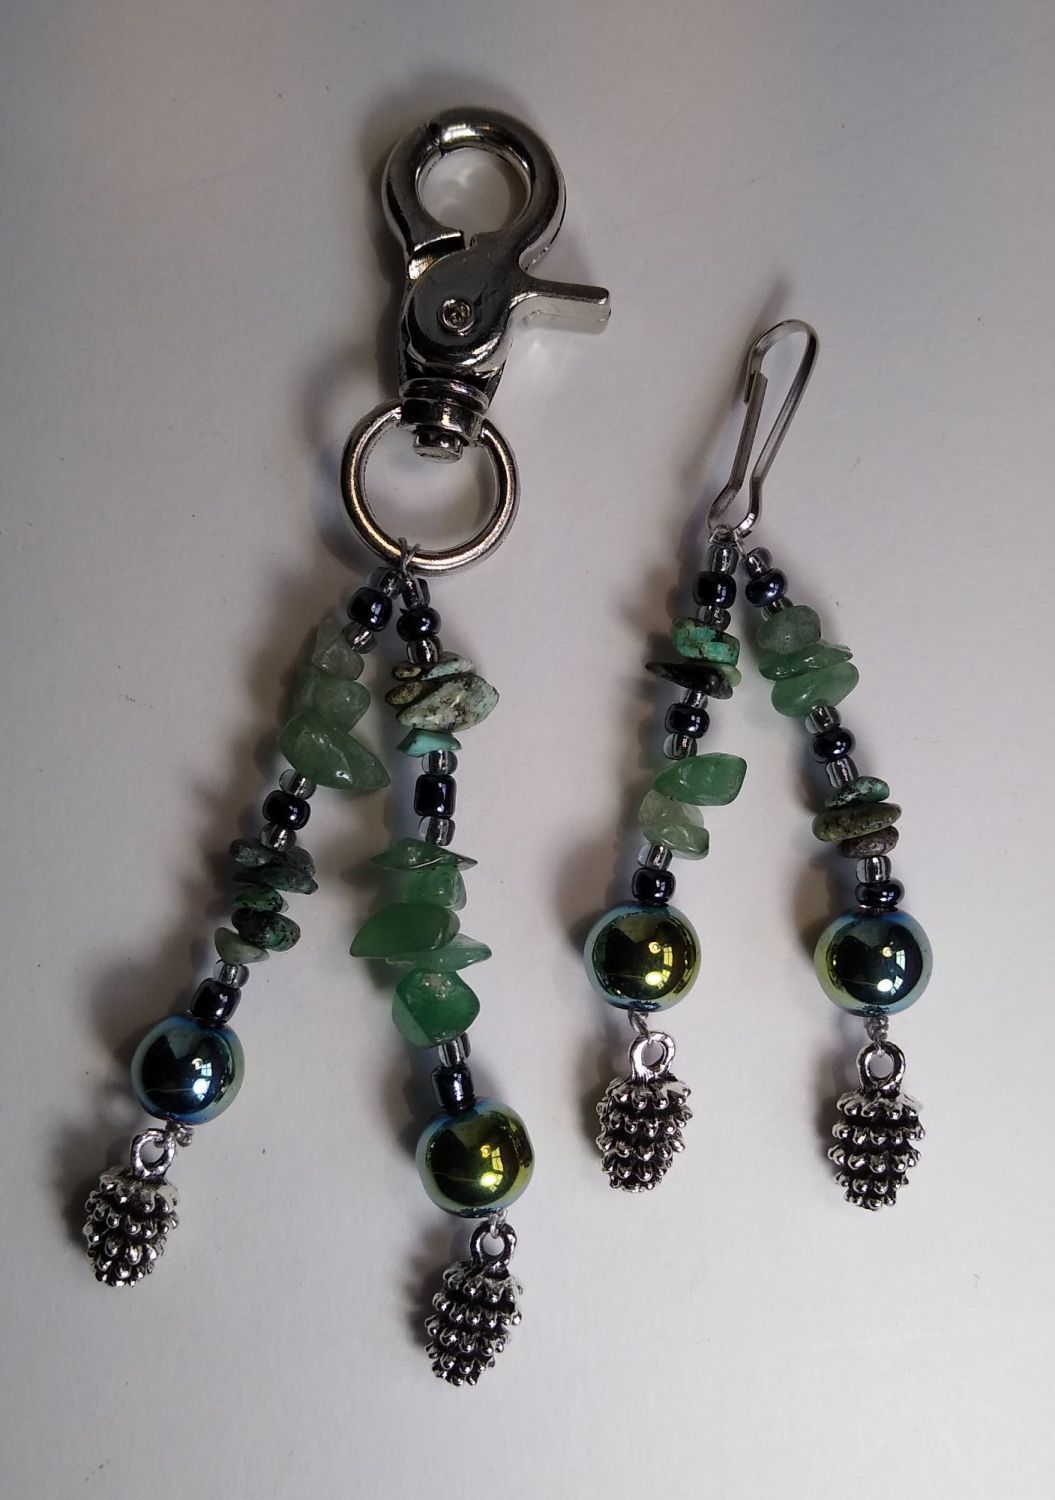 PINE CONES HEADCOLLAR AND BRIDLE CHARMS. 